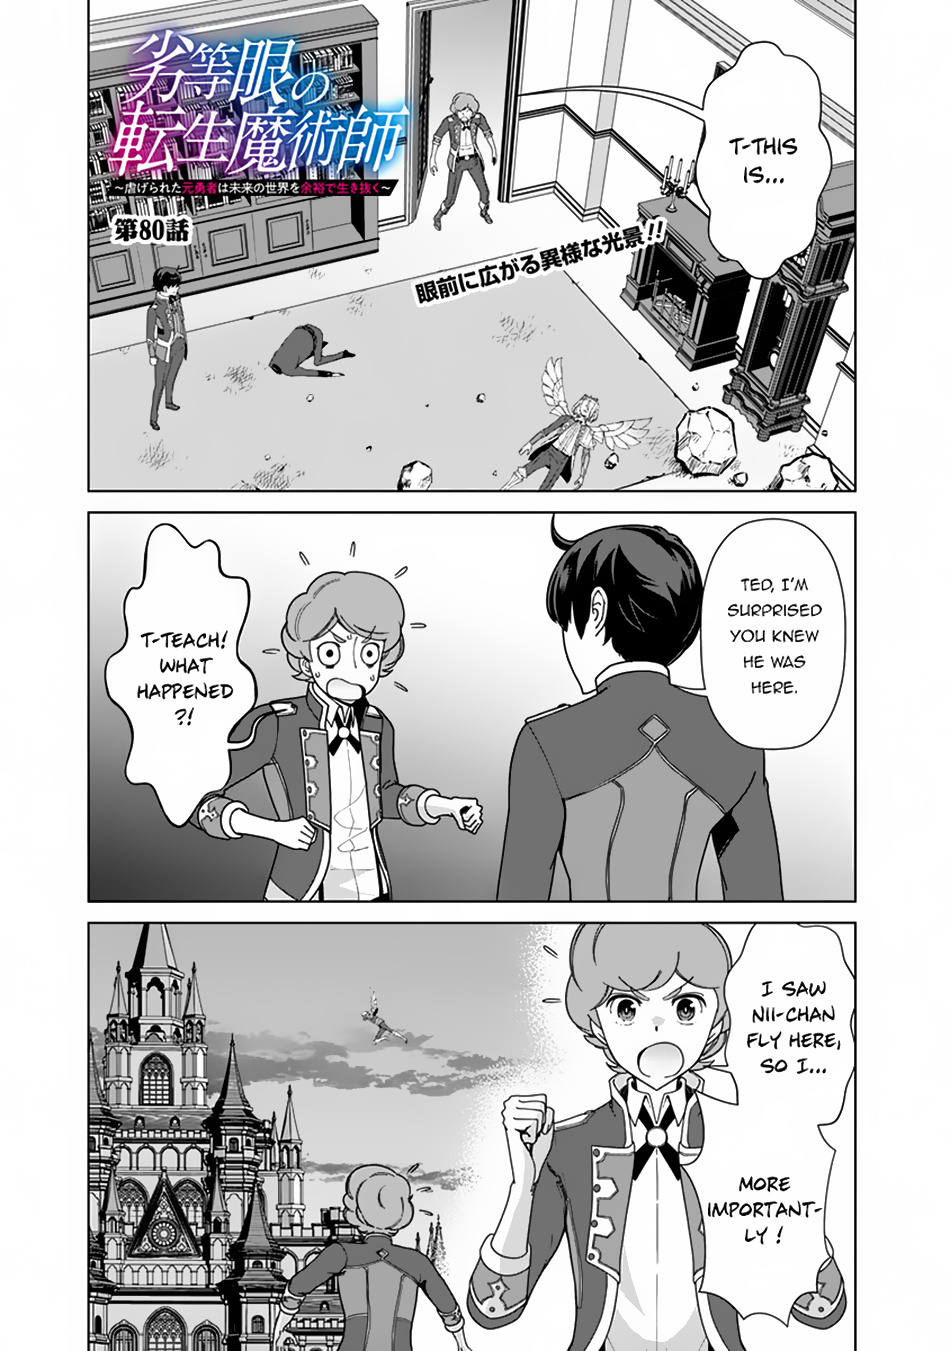 The Reincarnation Magician Of The Inferior Eyes - Page 2